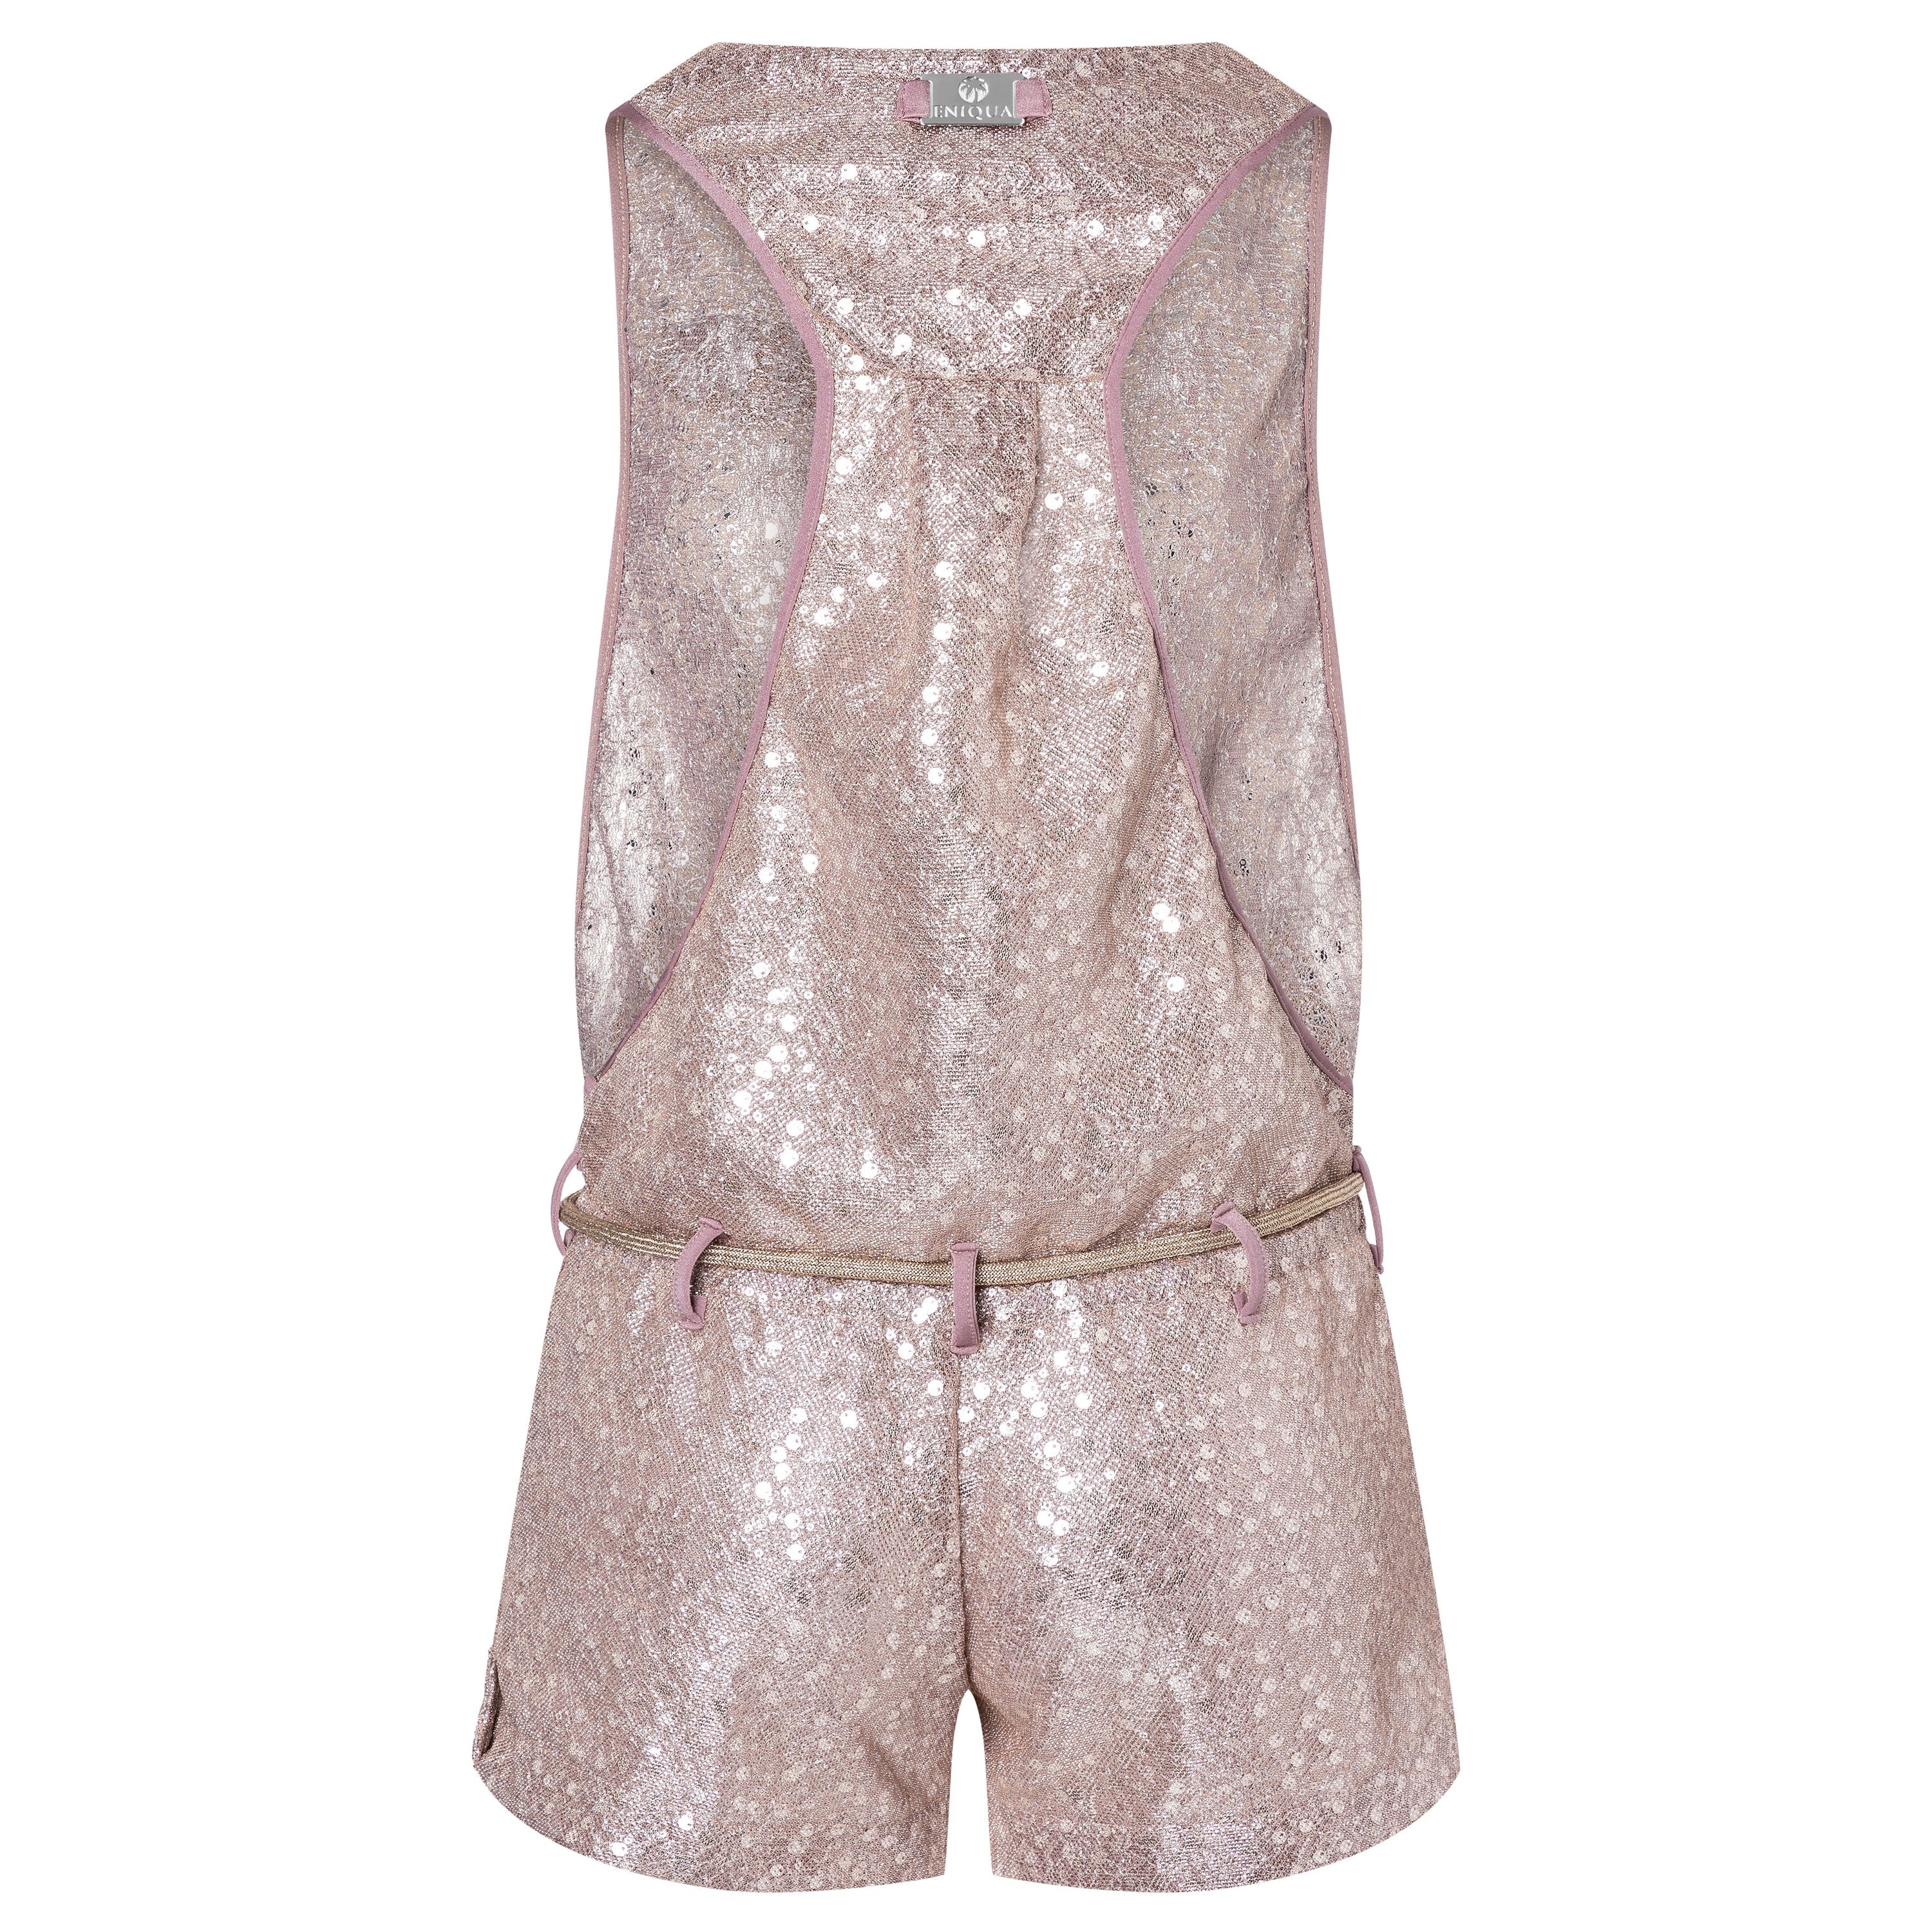 Eniqua - Locked Up Bling Playsuit